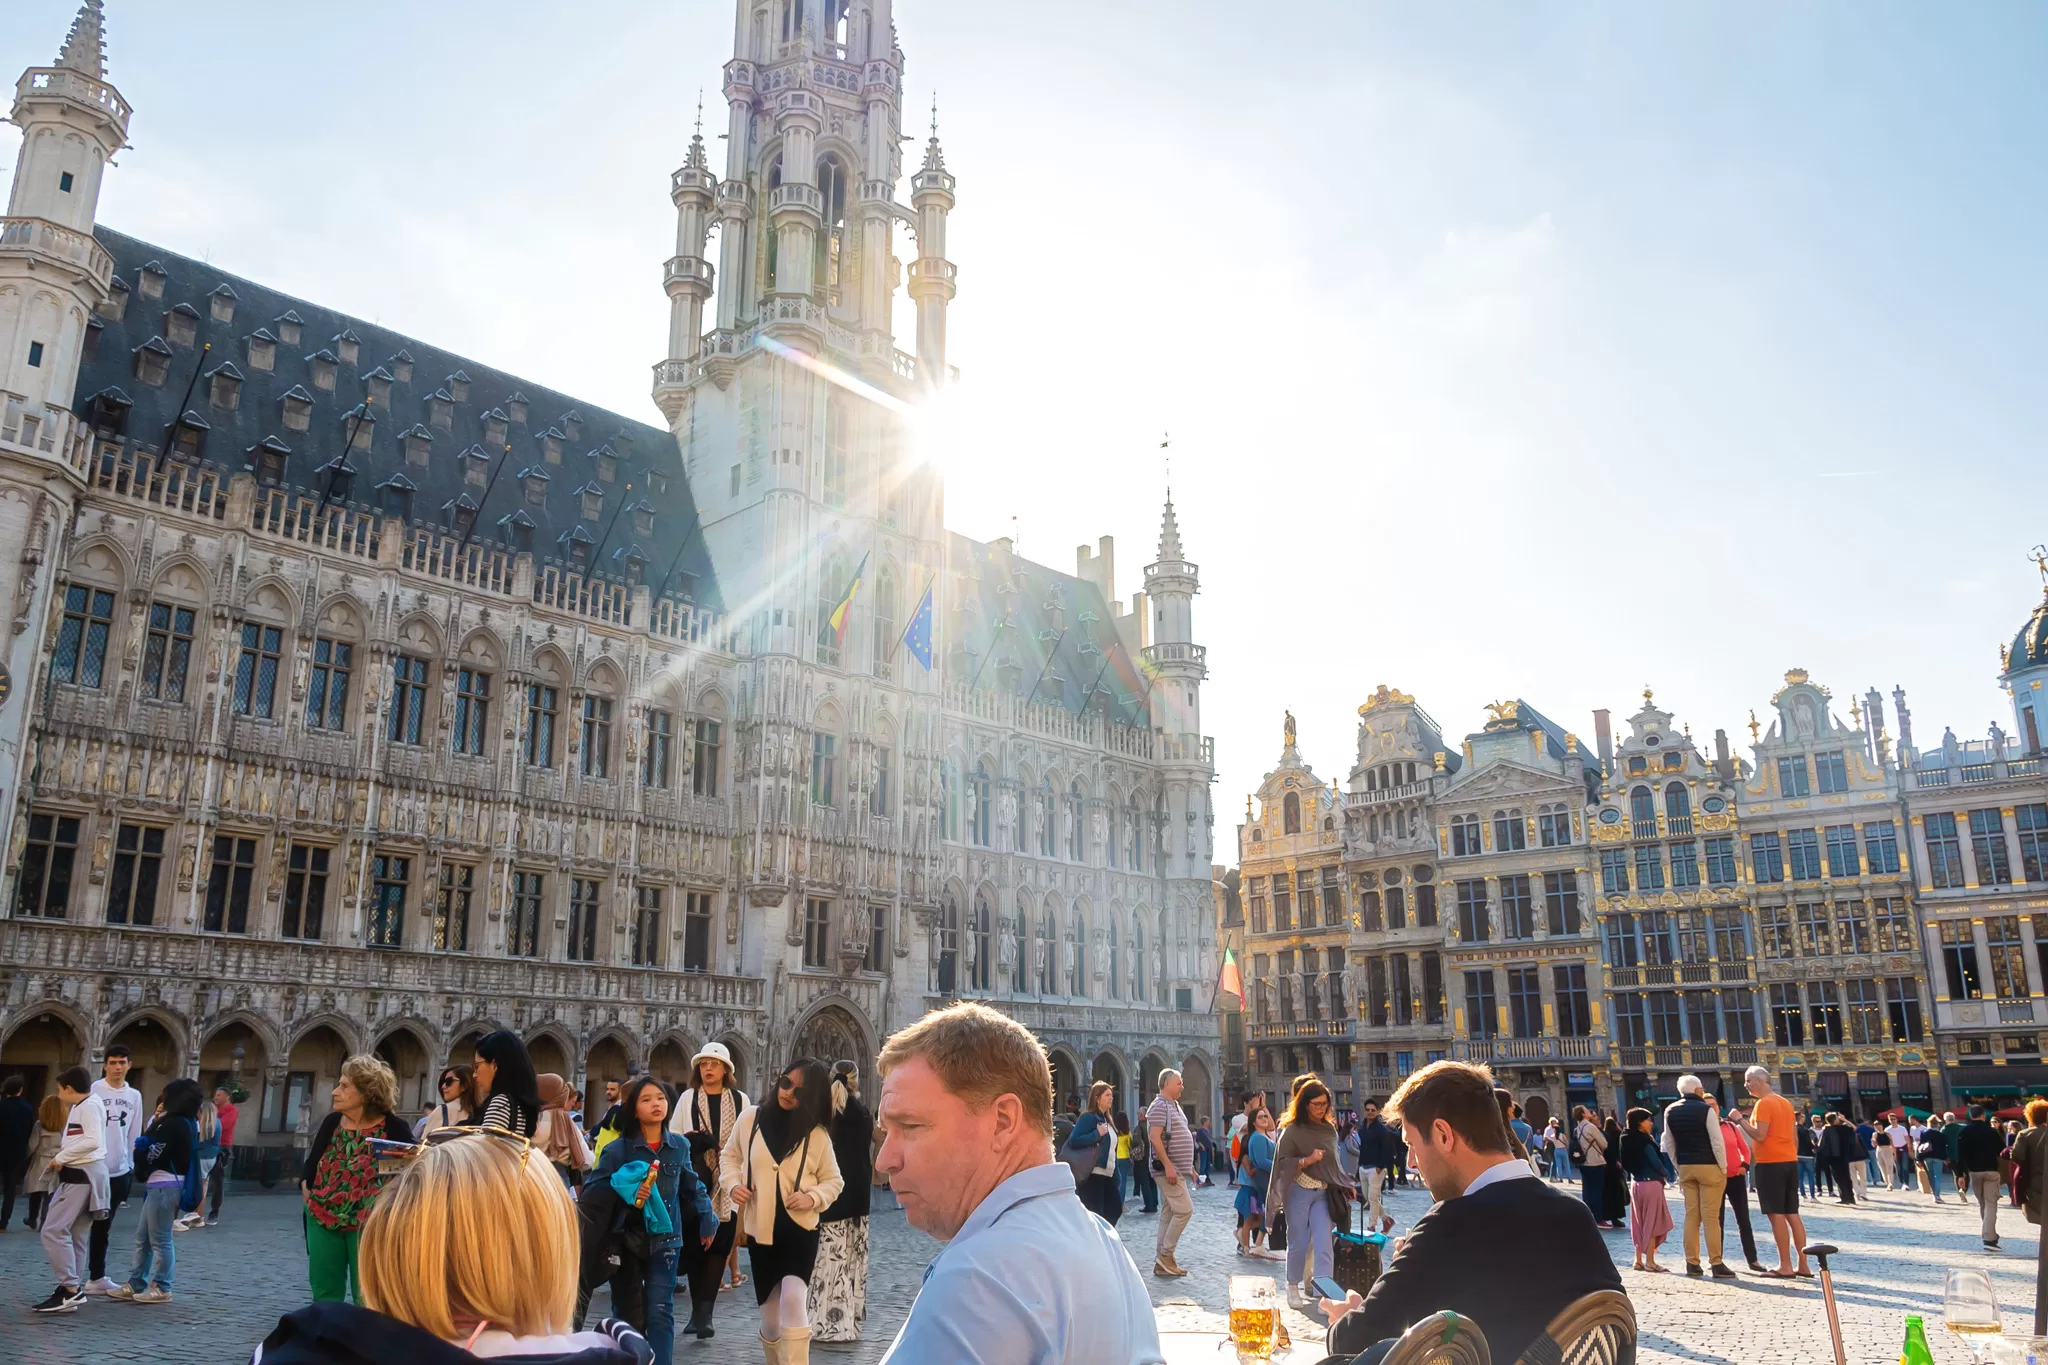 This image shows the crowds on a summer day at Grand Place in Brussels, Belgium.  Historic guilded buildings are in the background. 